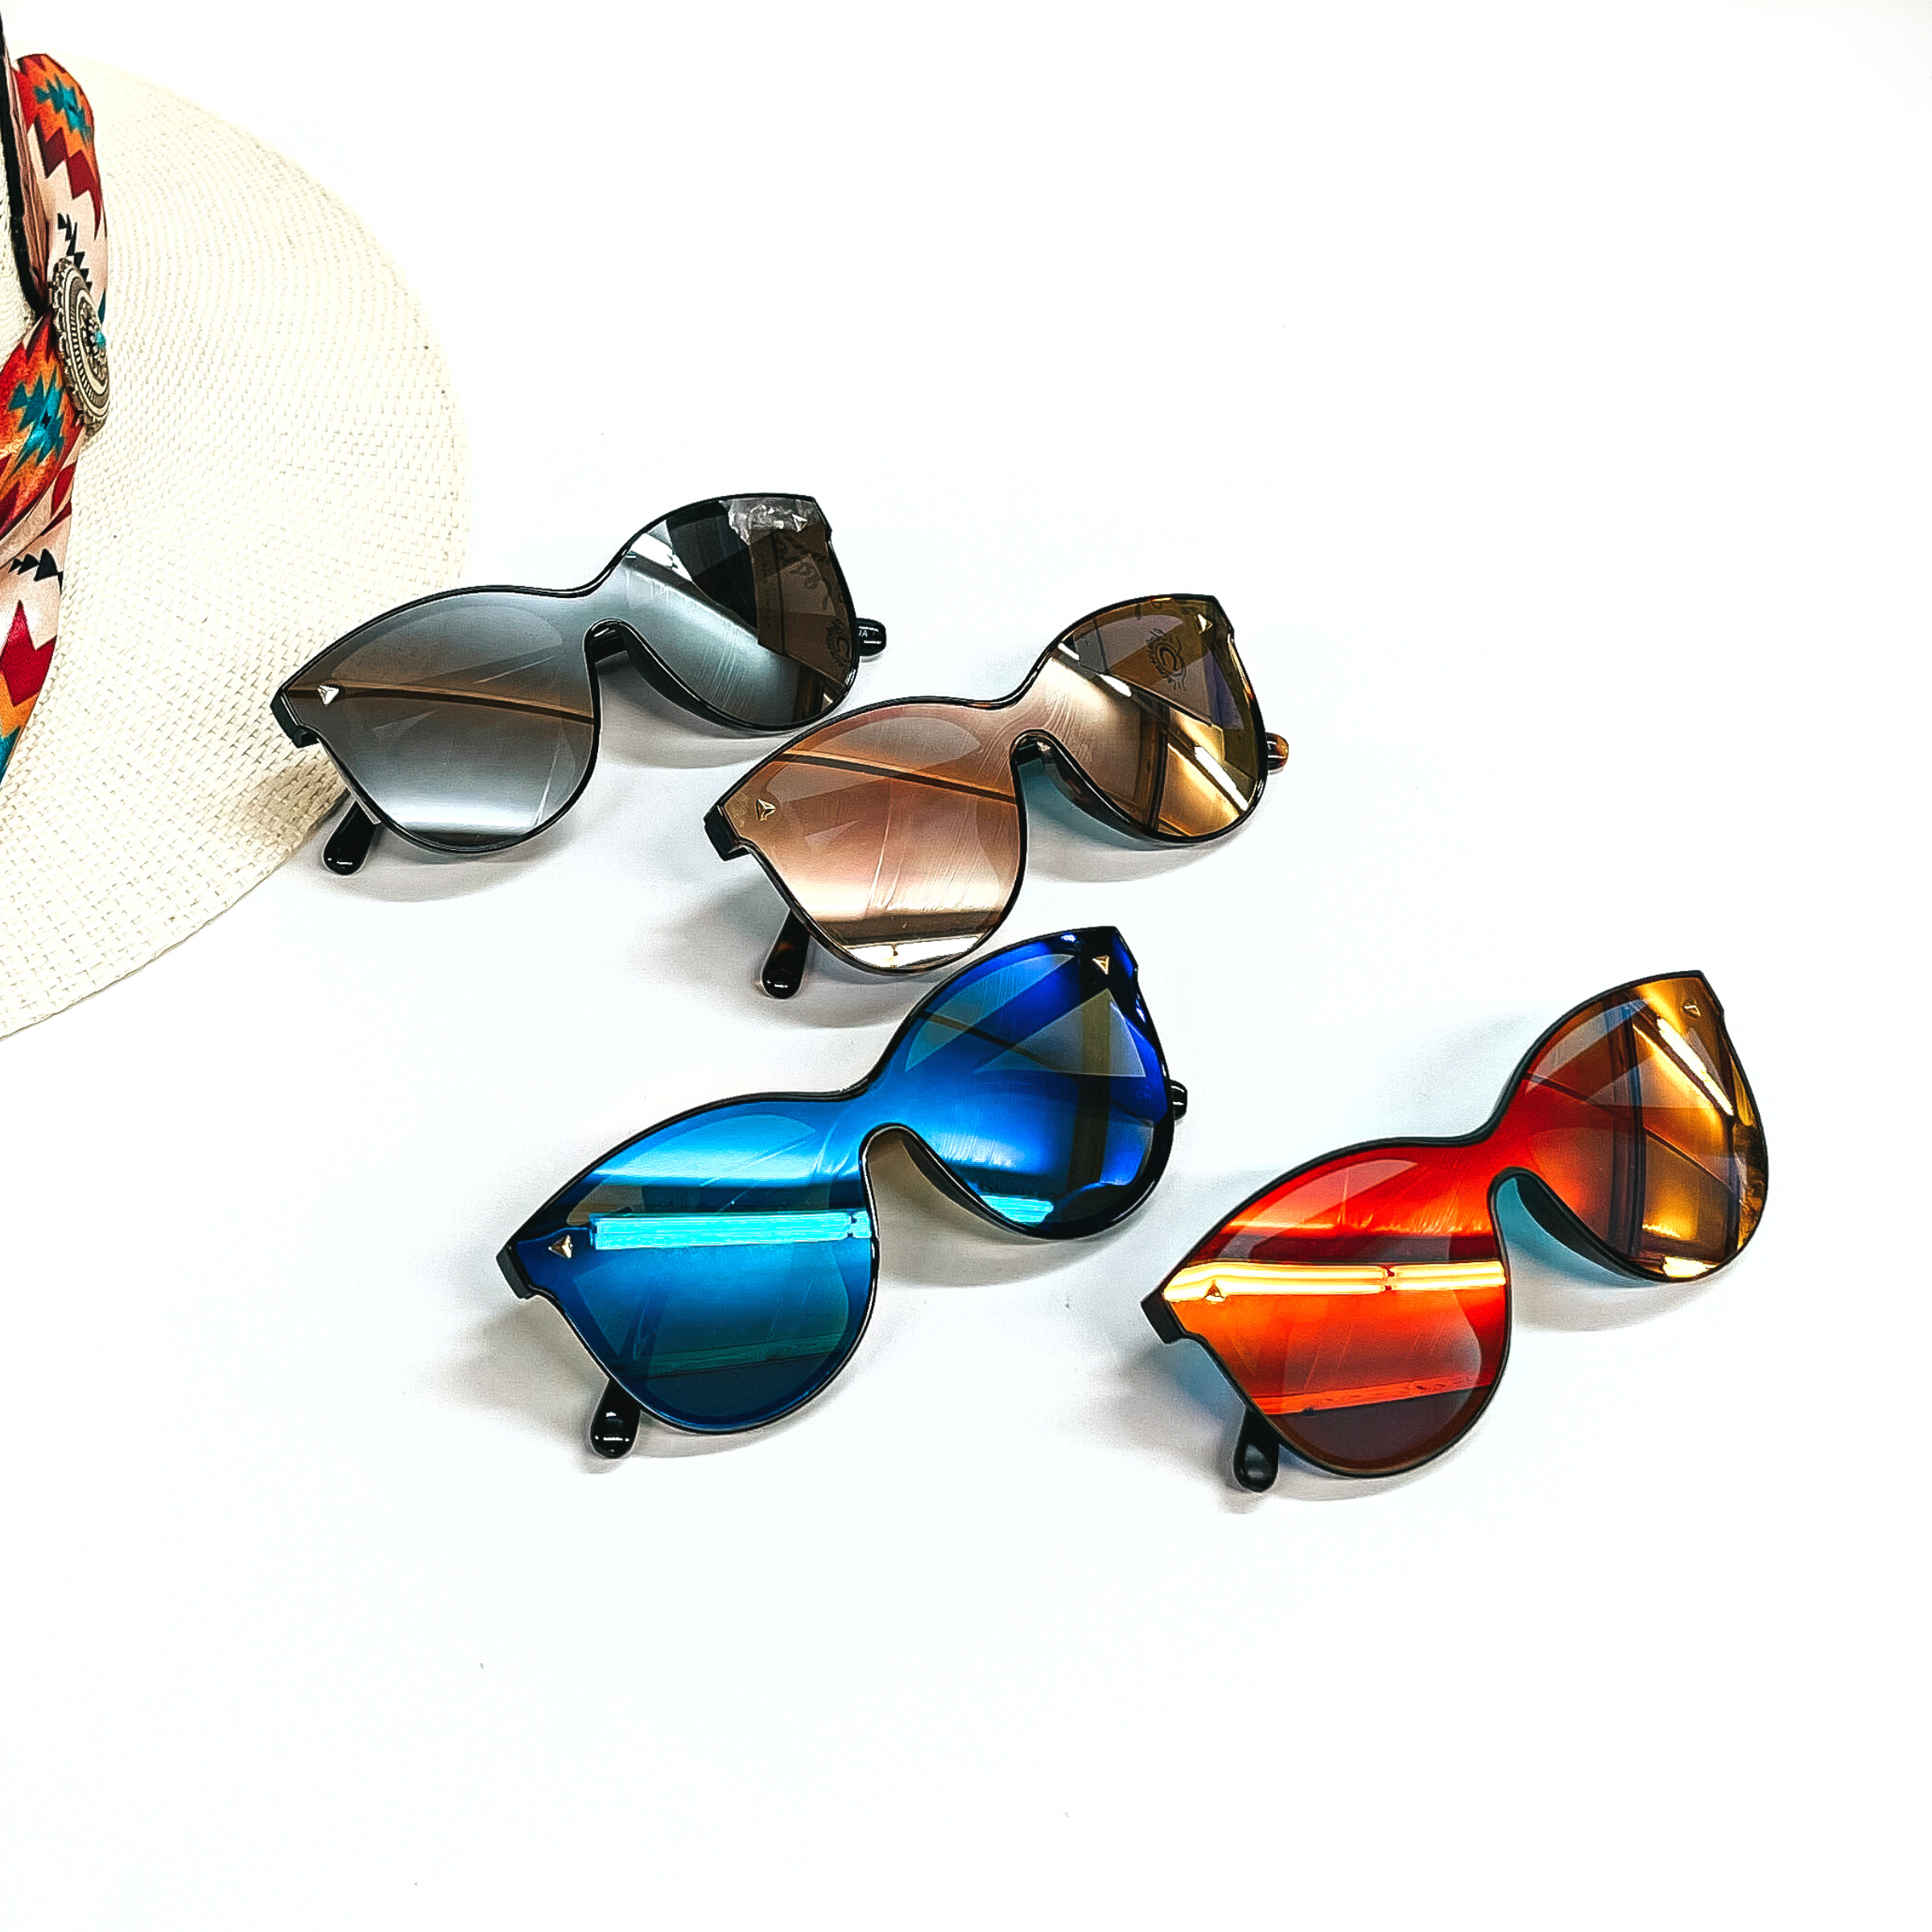 There are four pairs of medium shielf sunglasses in different colors such as a orange,  blue, coral, and silver. These sunglasses are taken on a white background with an ivory  straw hat and colorful aztec orint hat band as decor.